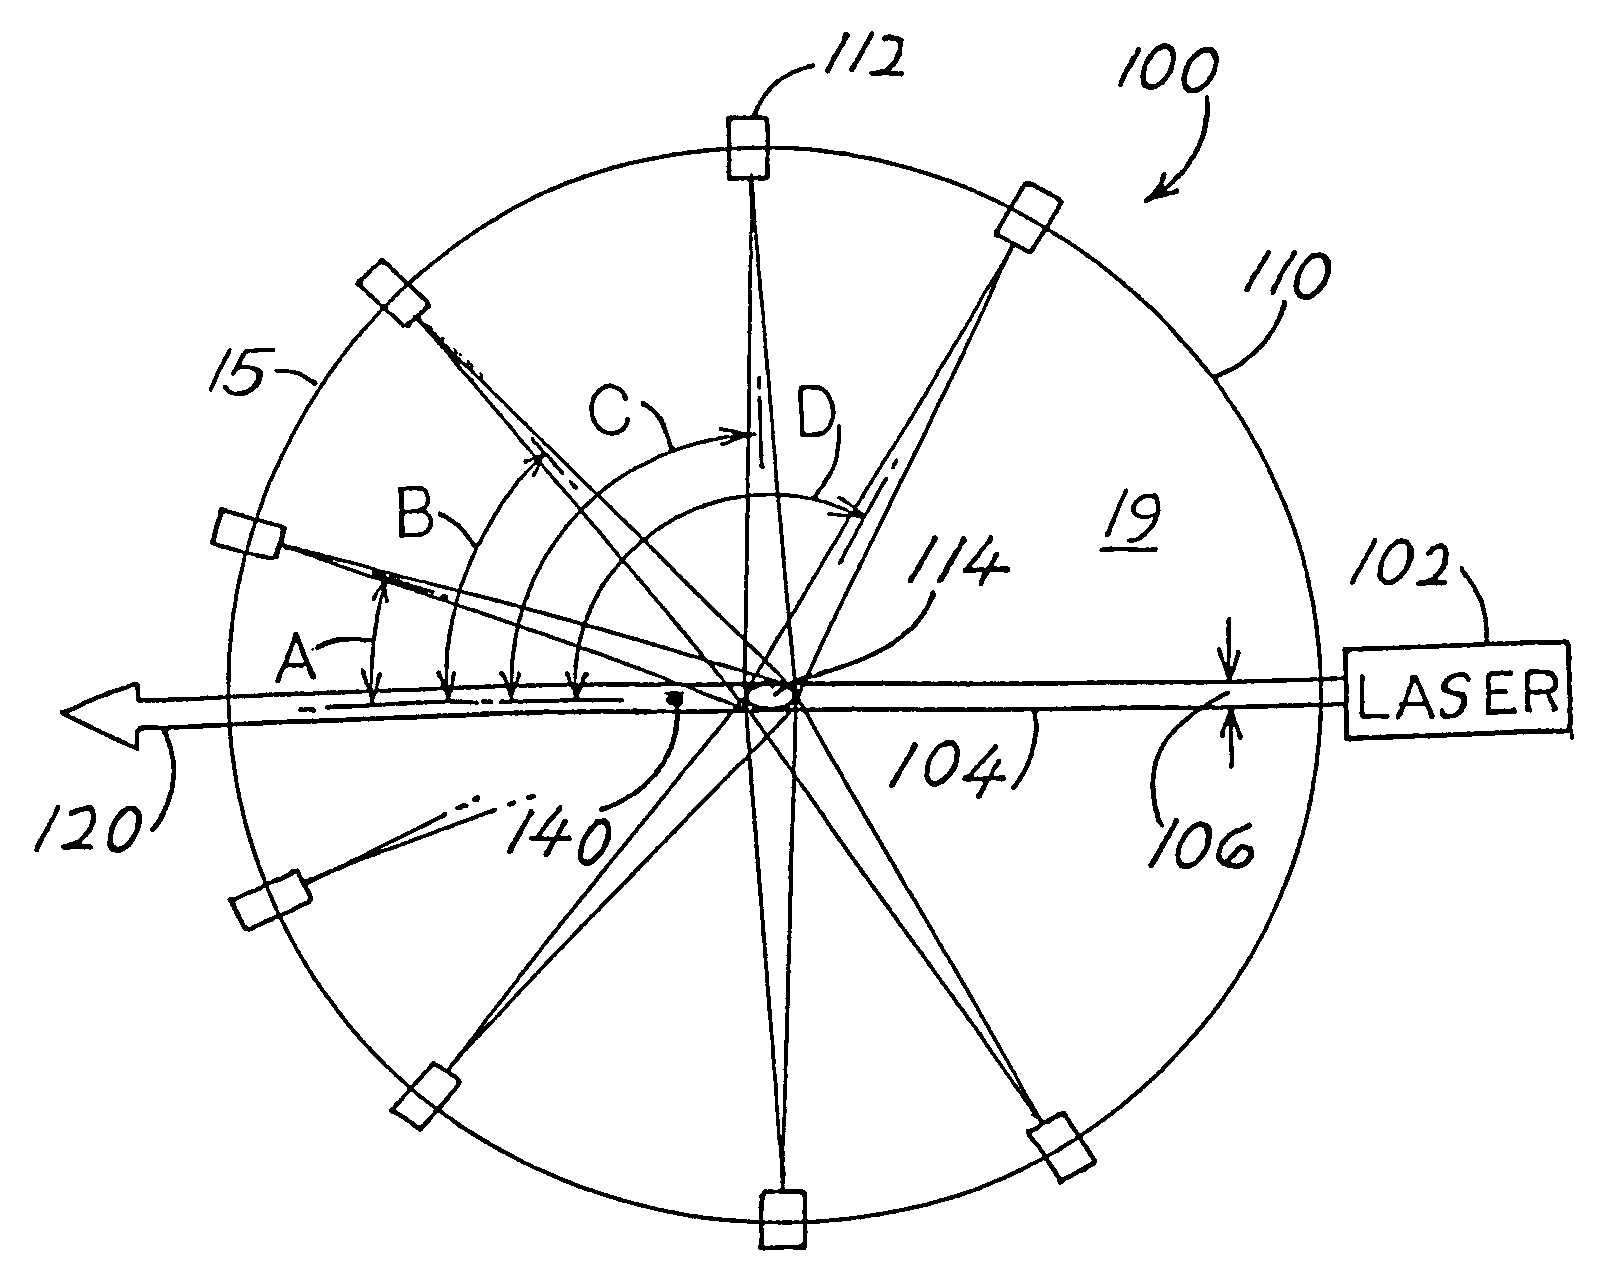 Particle ID with narrow angle detectors